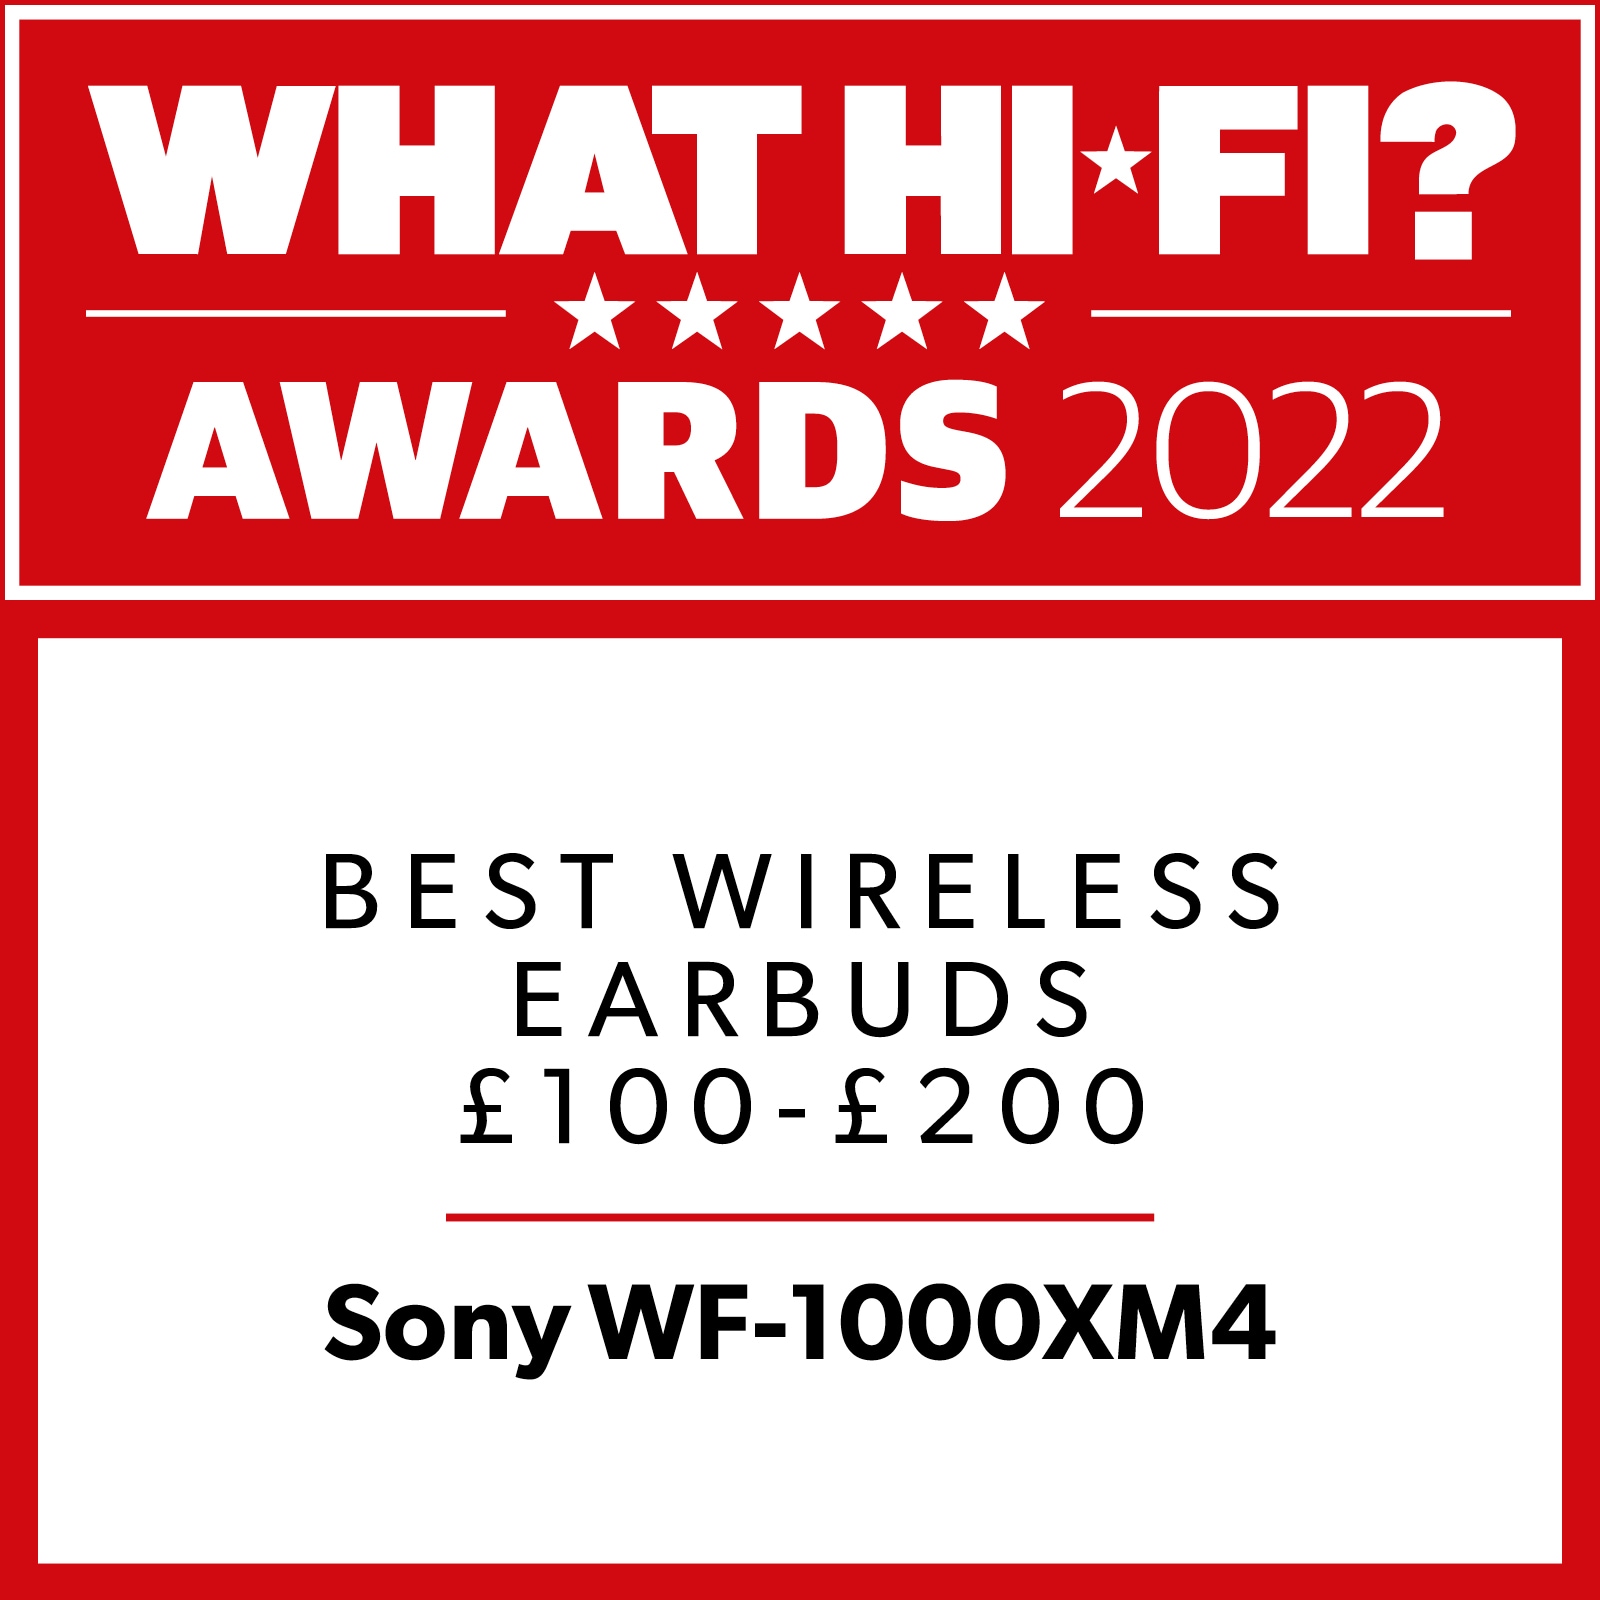 "What Hi-Fi? Awards 2022 winner. Sony delivers the goods with another stunning pair of true wireless earbuds."